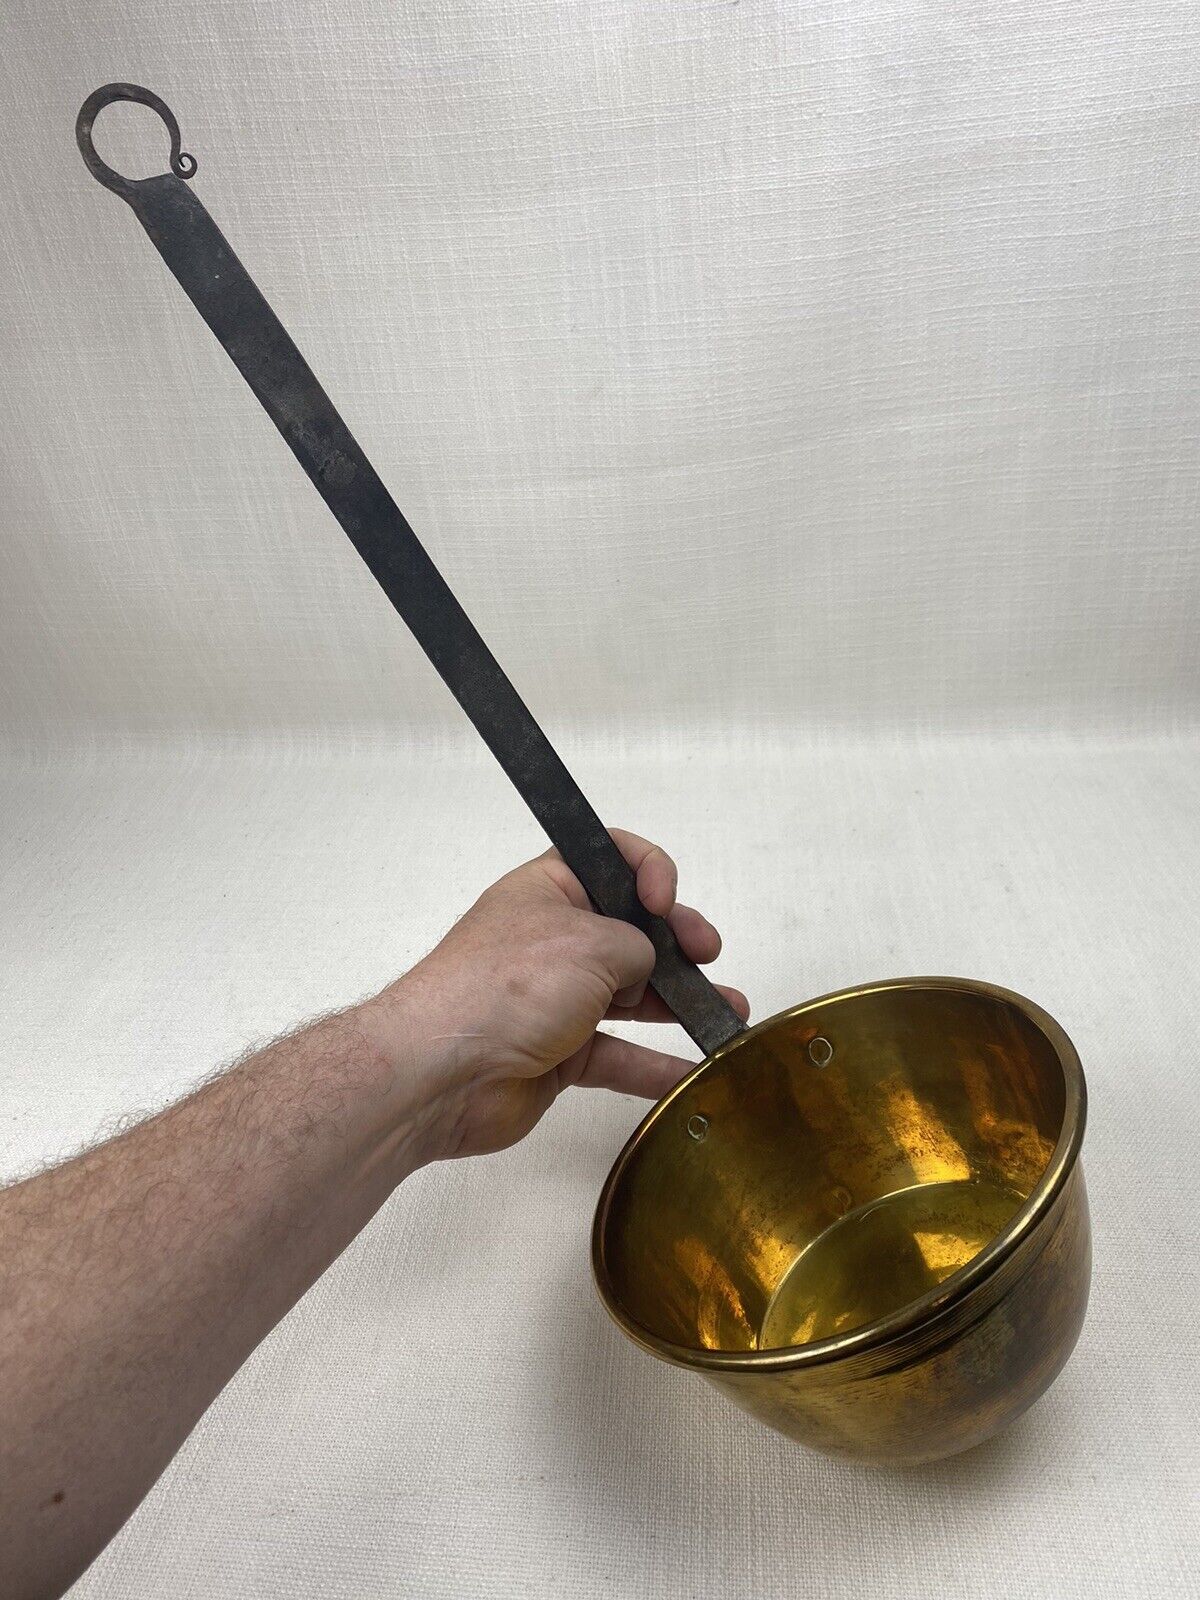 Vintage Large Brass Ladle With Hand Forged Steel Handle. 6”x 3” Ladle. 18” Long